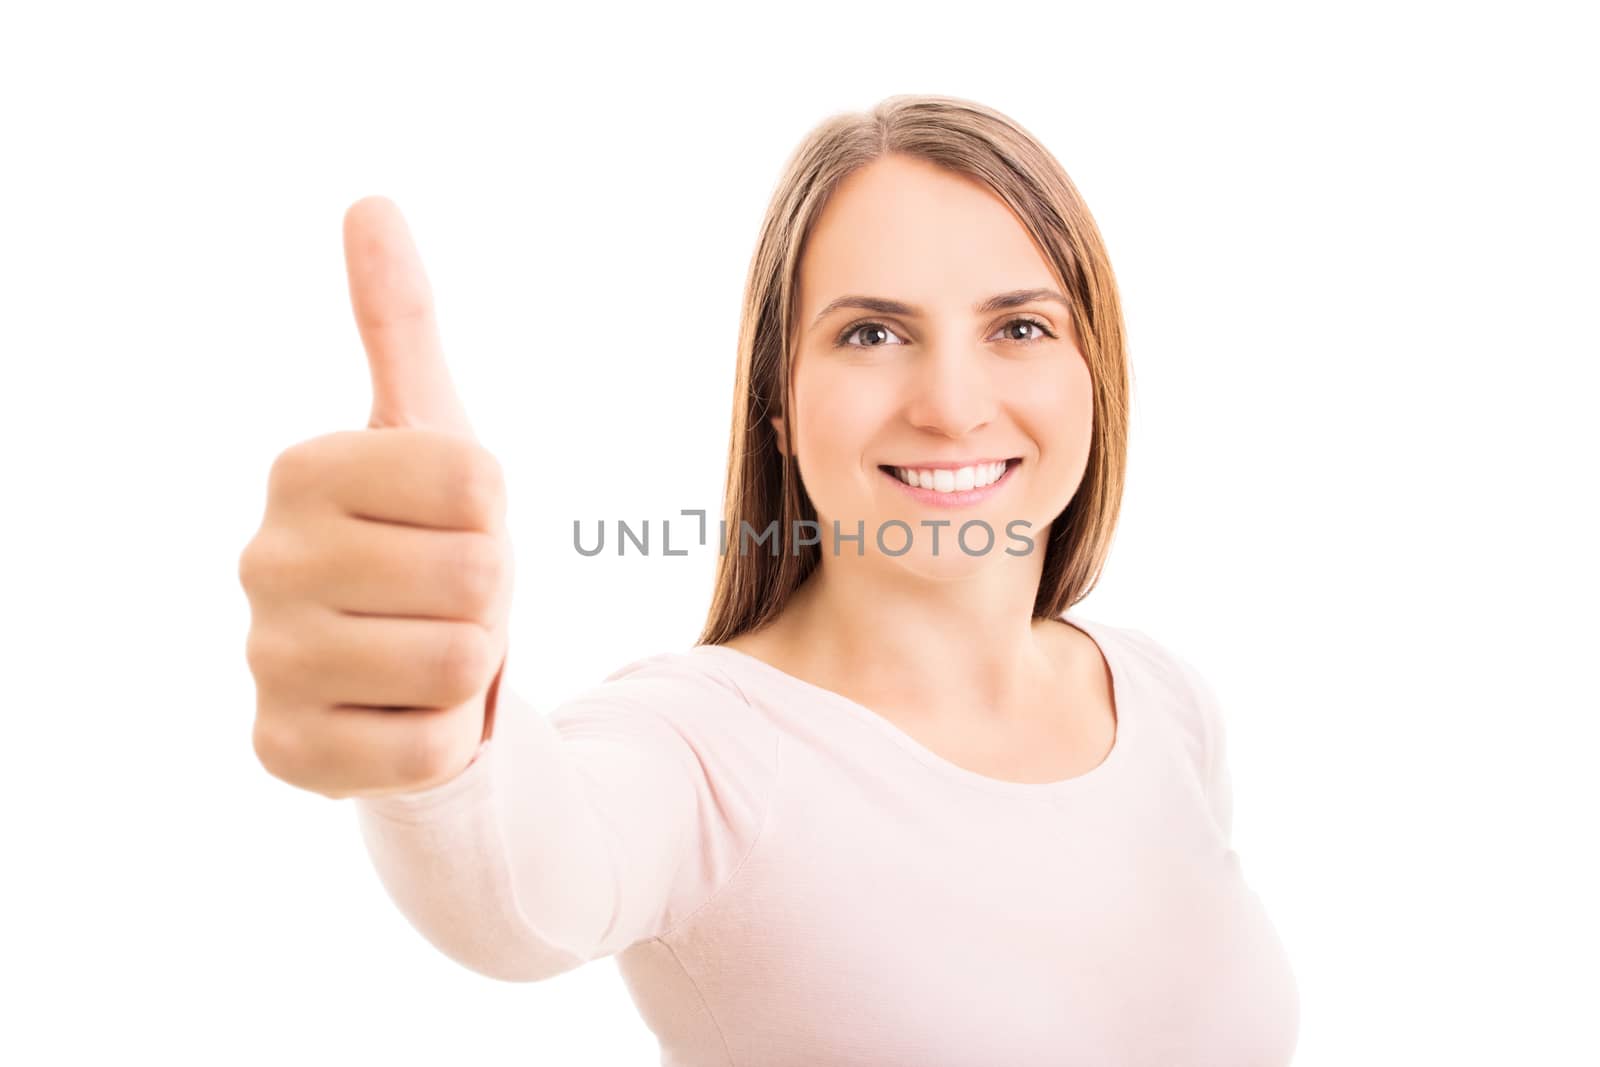 Smiling beautiful young woman giving thumbs up, isolated on white background. Good choice!